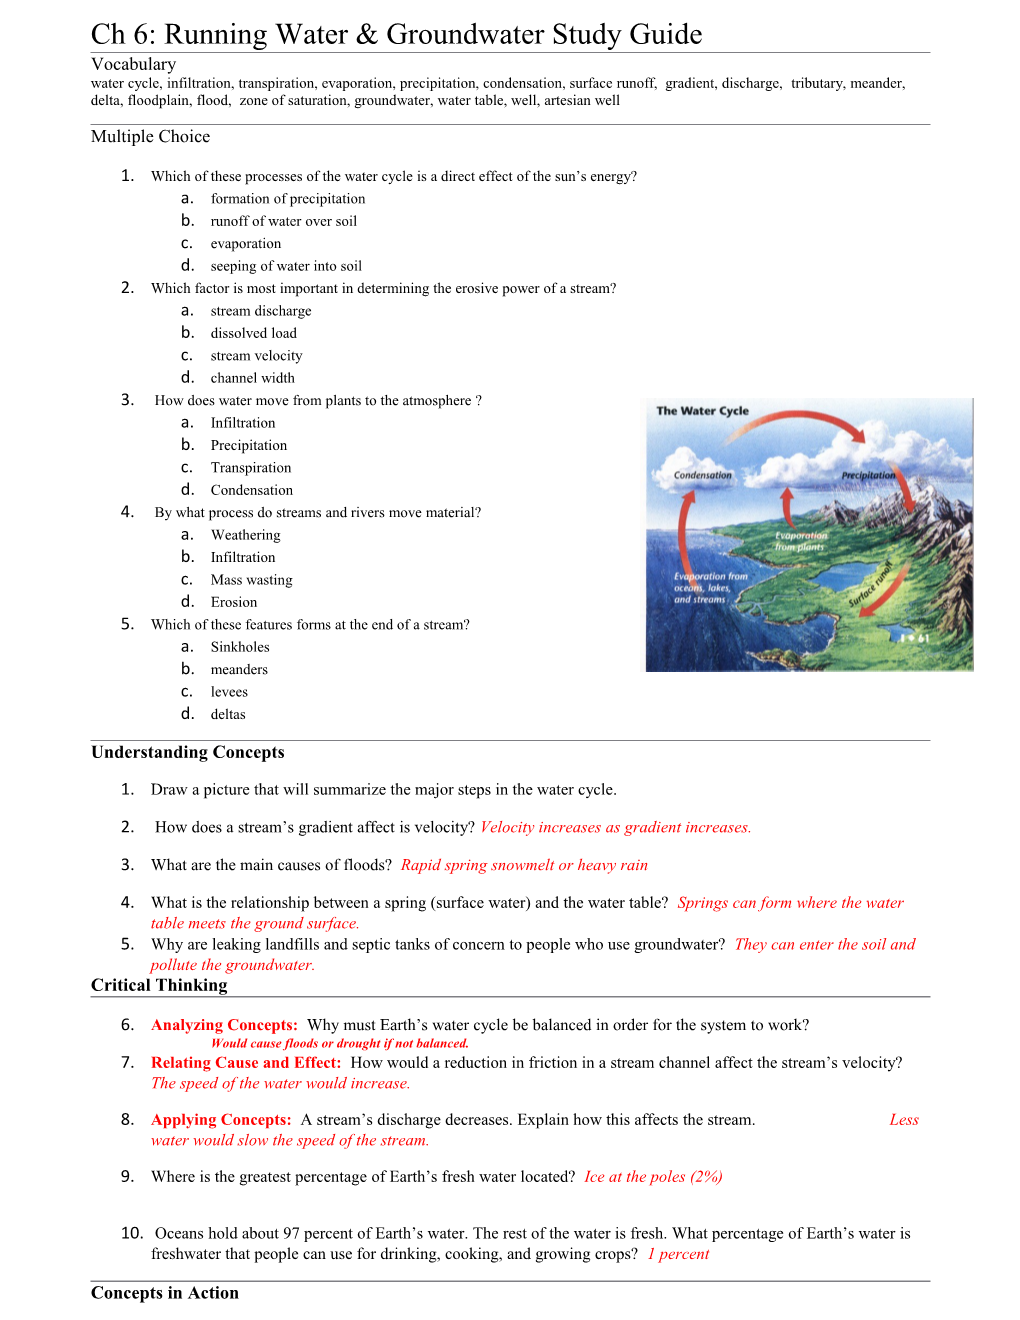 Ch 6: Running Water & Groundwater Study Guide